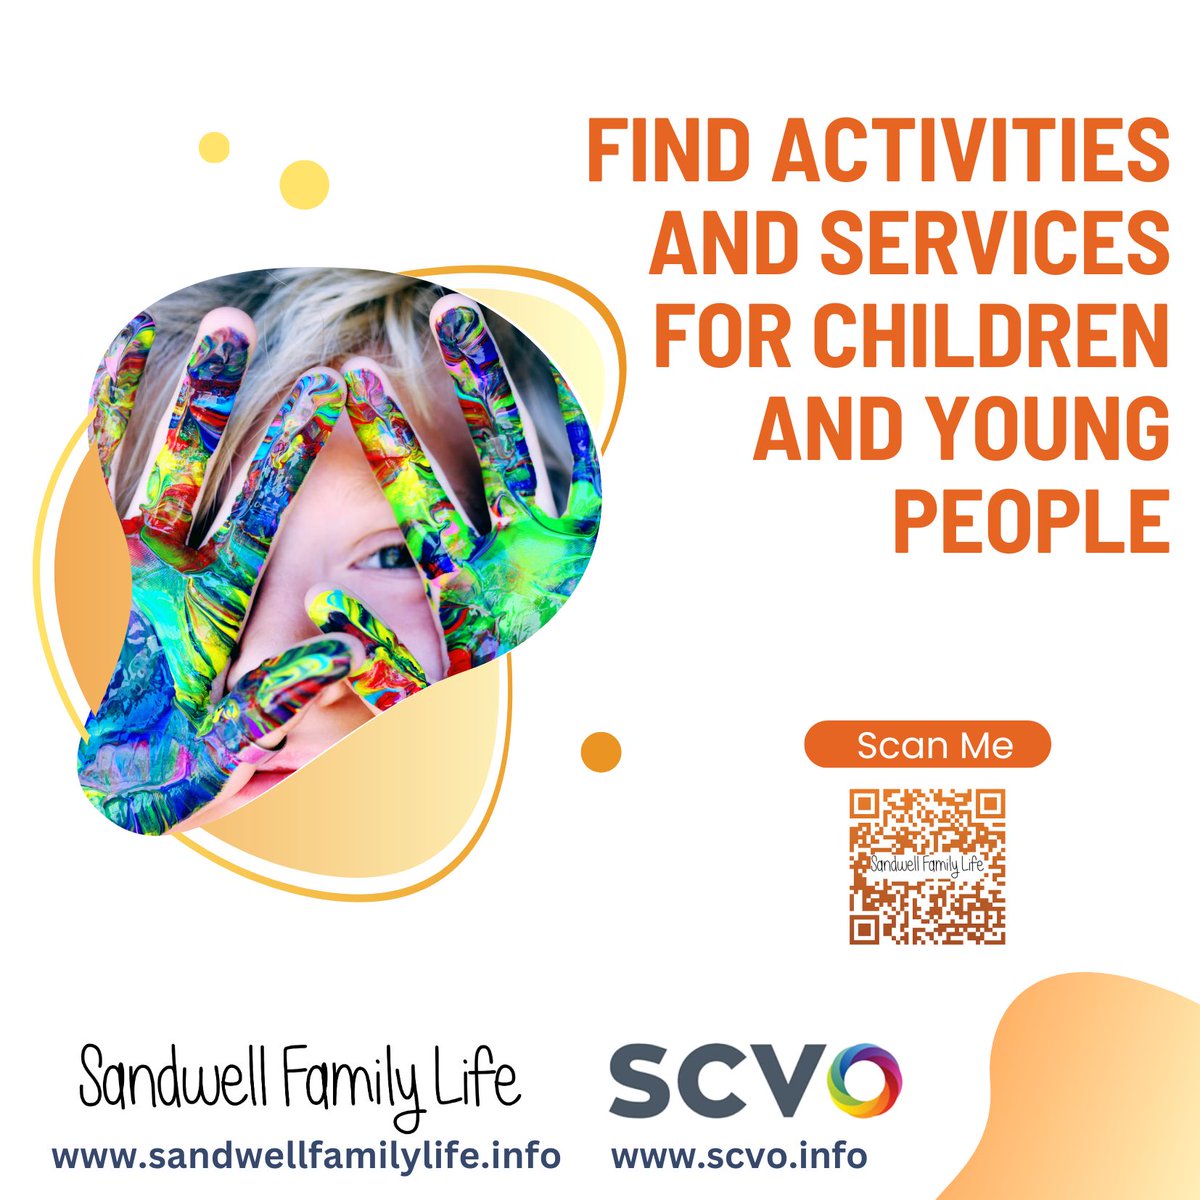 Sandwell Family Life’s portal lists everything from sports activities to improved emotional wellbeing, from youth clubs to music, arts and culture – as well as support for parents. Find out more here: sandwellfamilylife.info